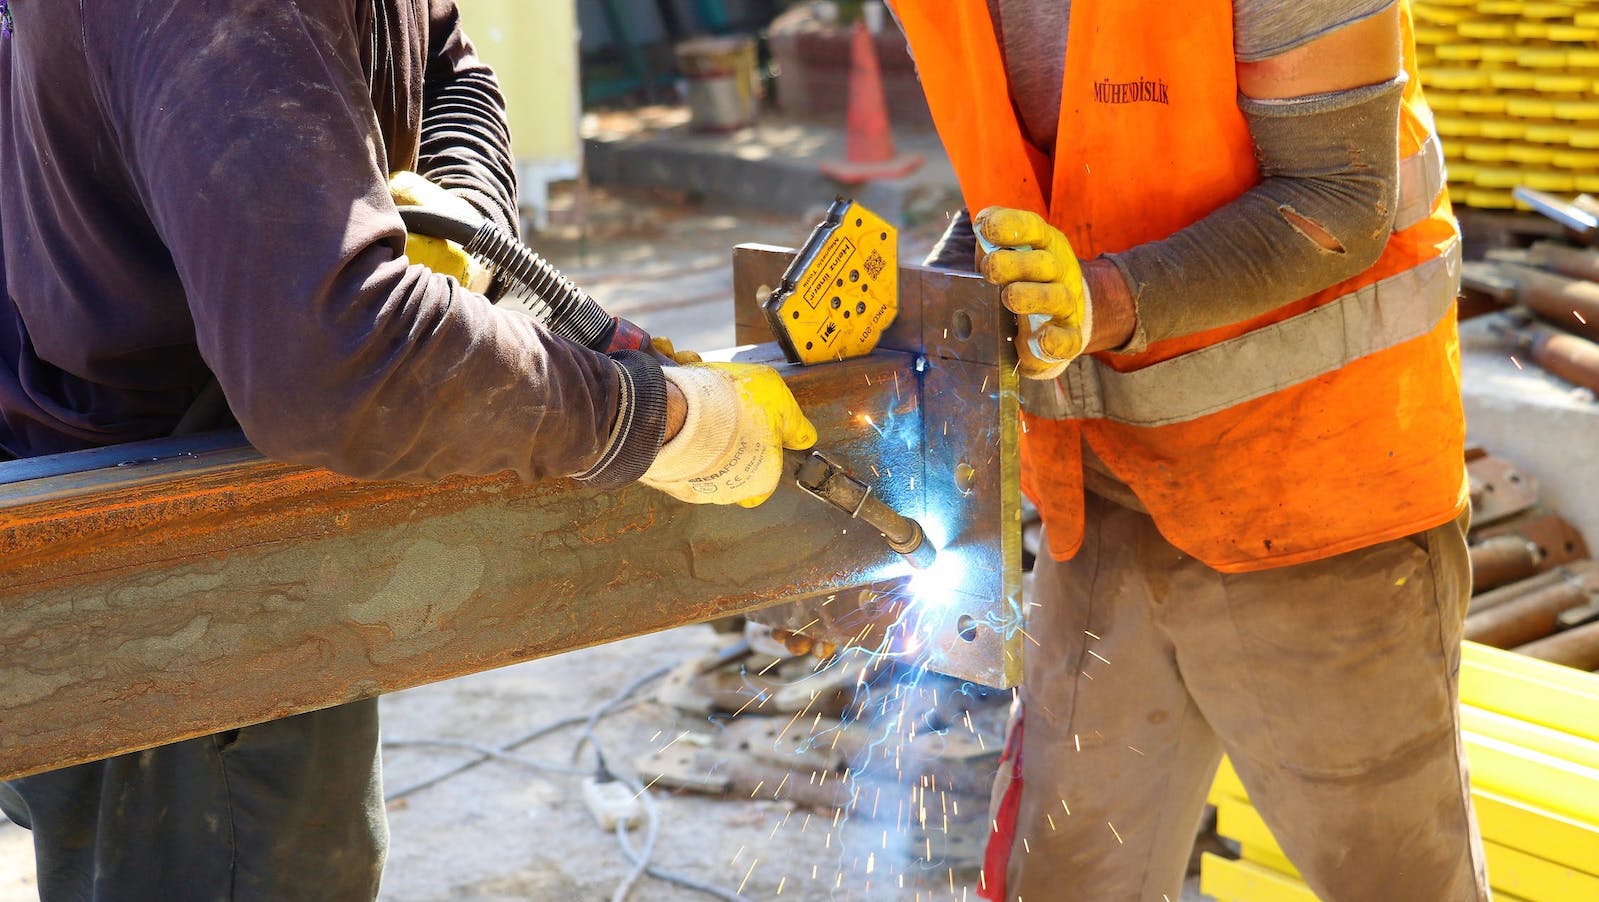 Two workers using a welding machine on a construction site